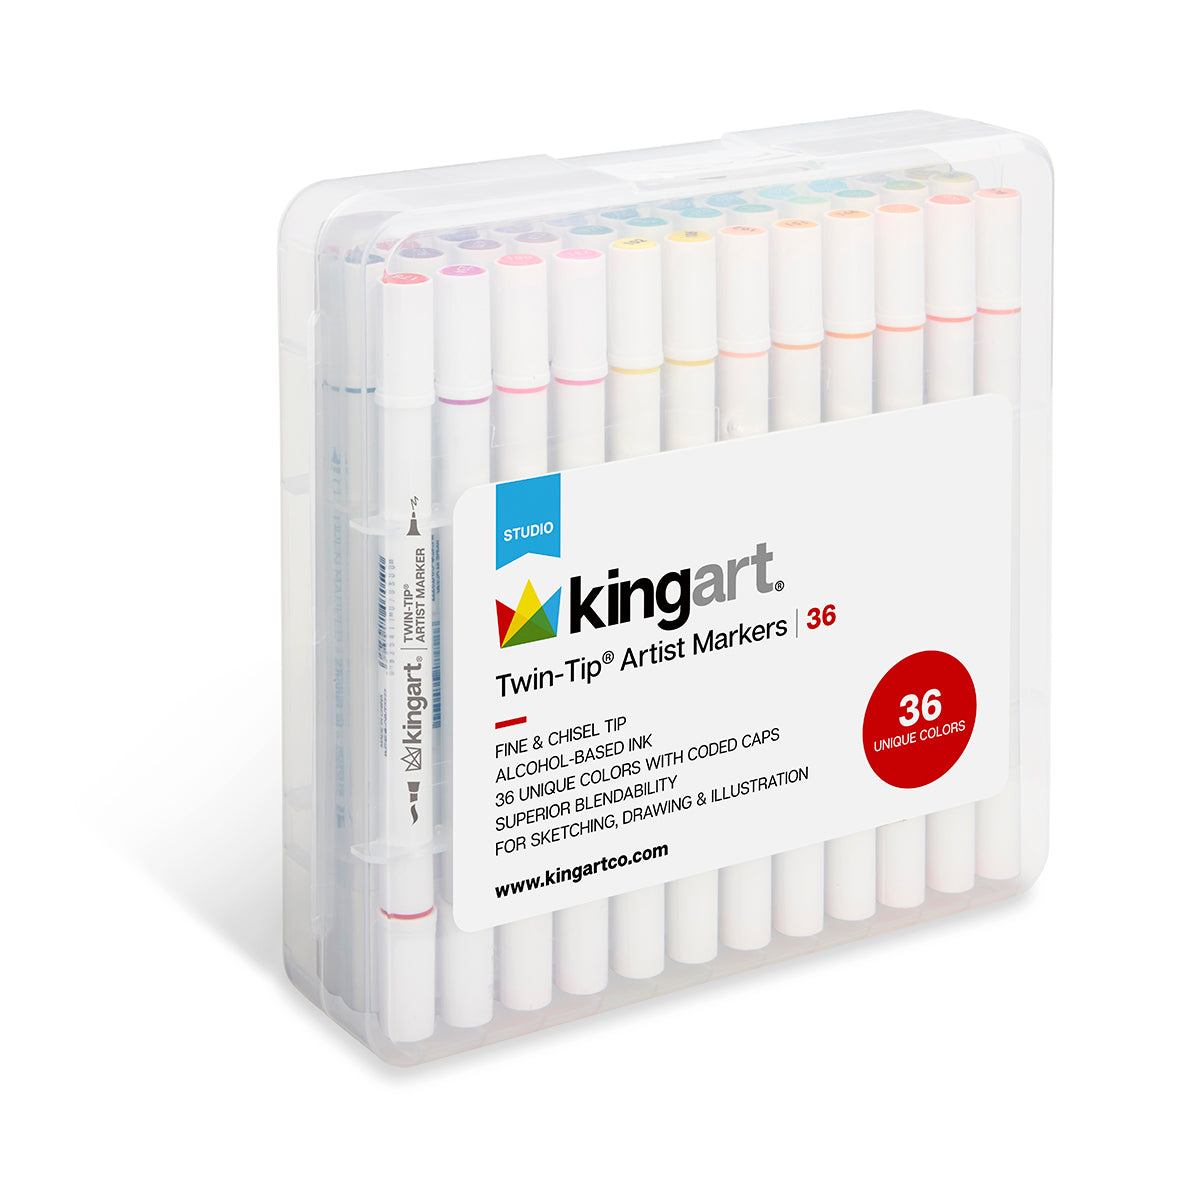 Kingart Studio Twin-Tip Brush & Ultra Fine Markers, Carrying Case, Set of 12 Unique Colors